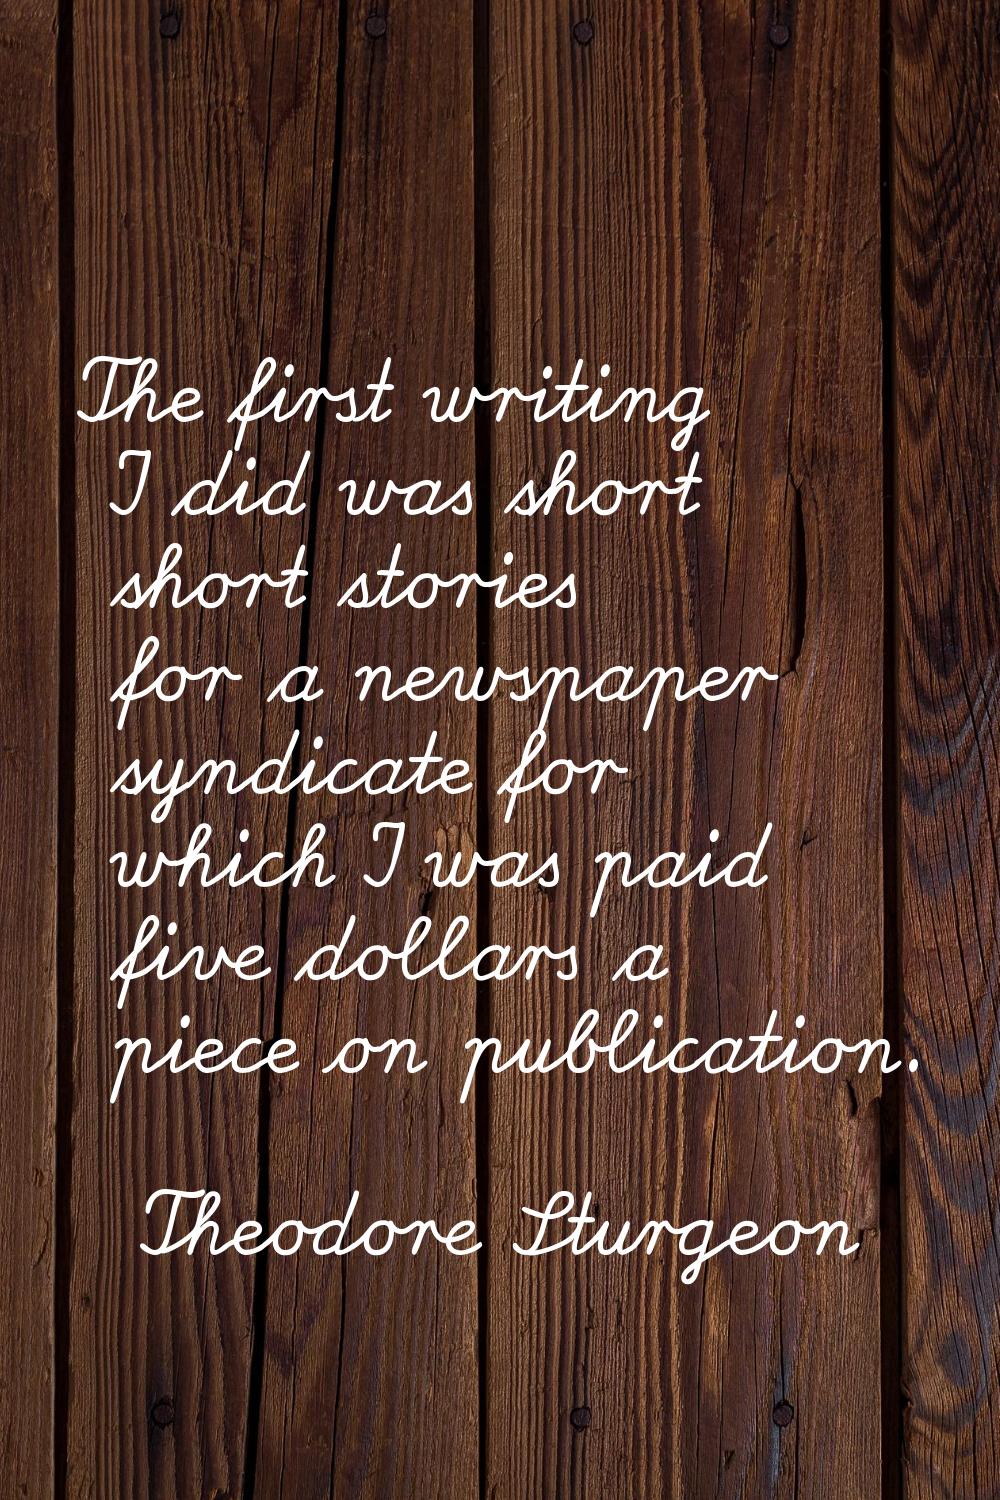 The first writing I did was short short stories for a newspaper syndicate for which I was paid five